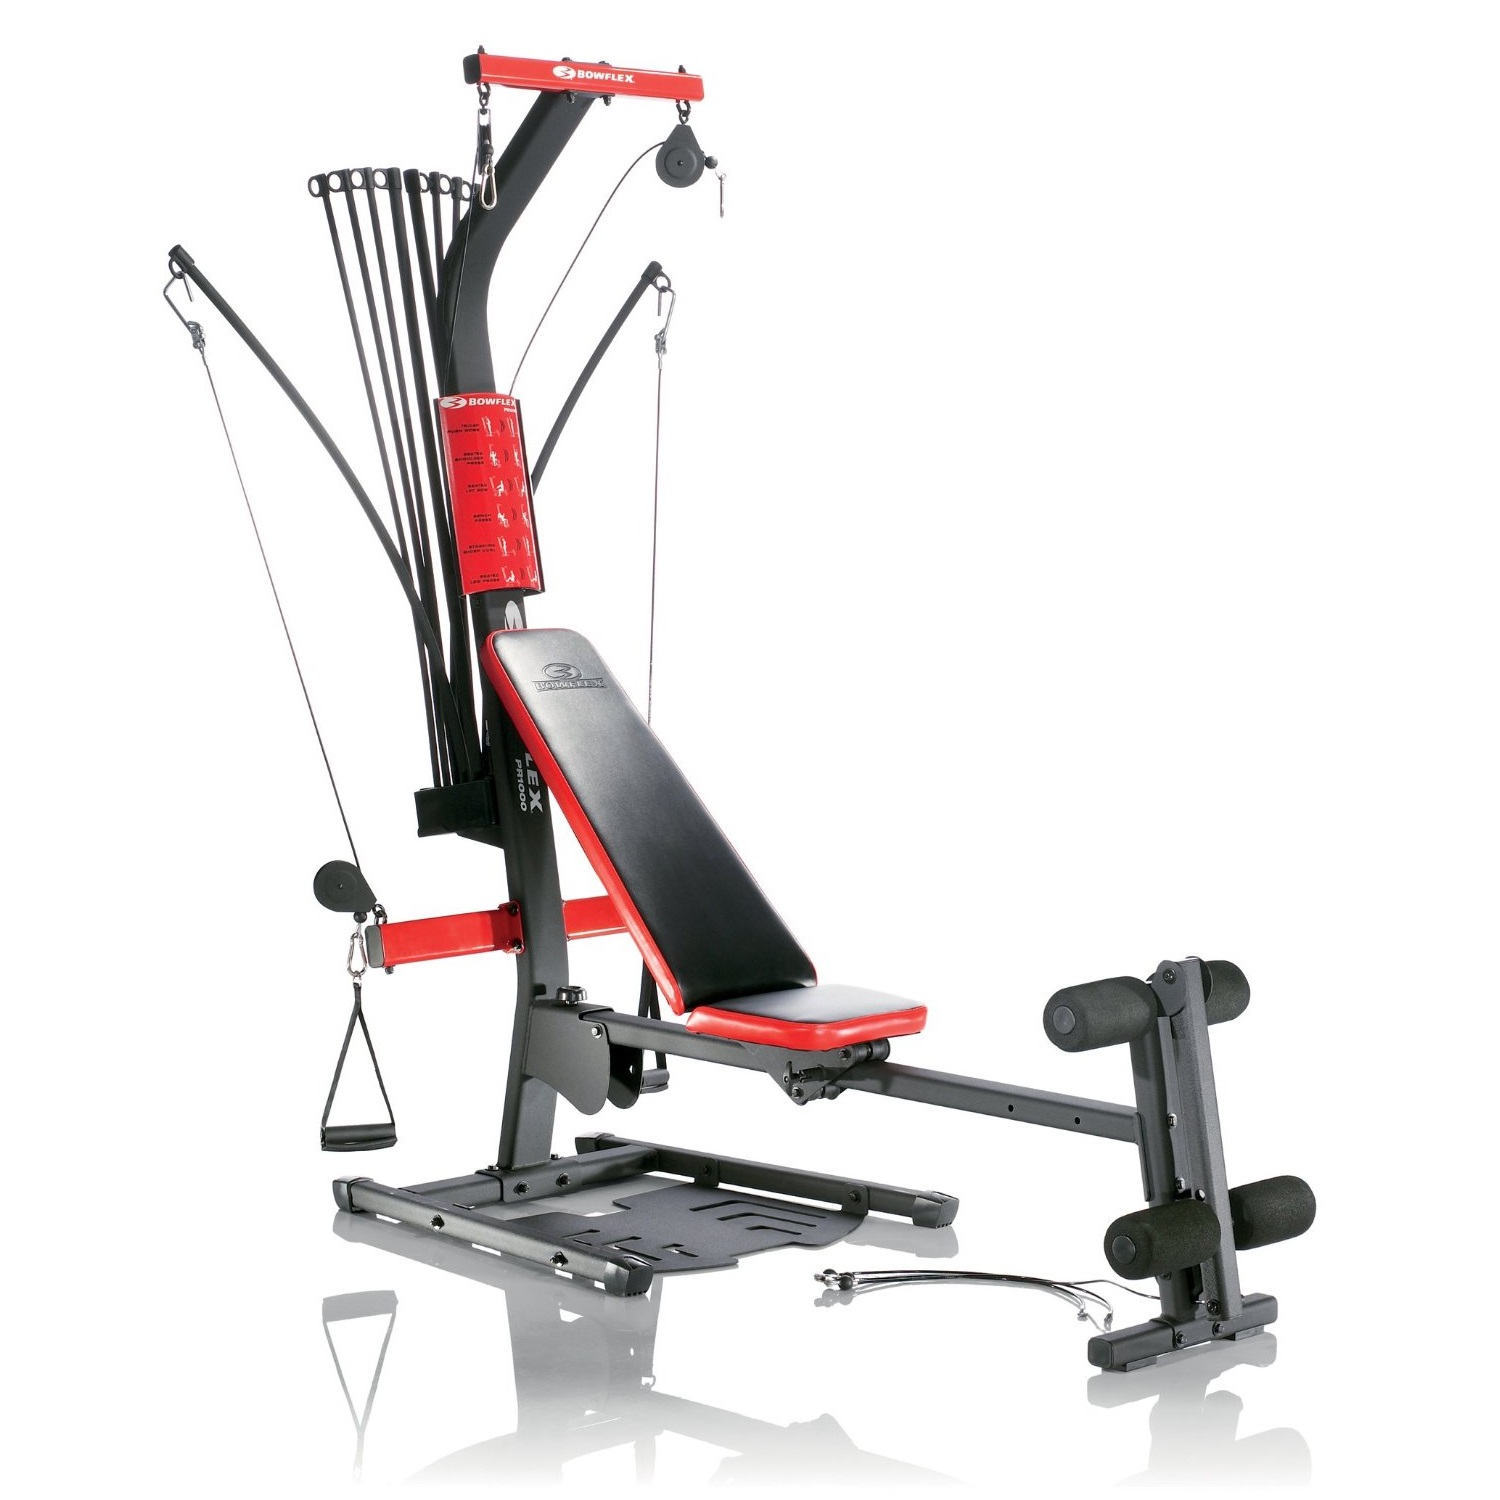 Product image of a new red and black Bowflex PR1000 home gym